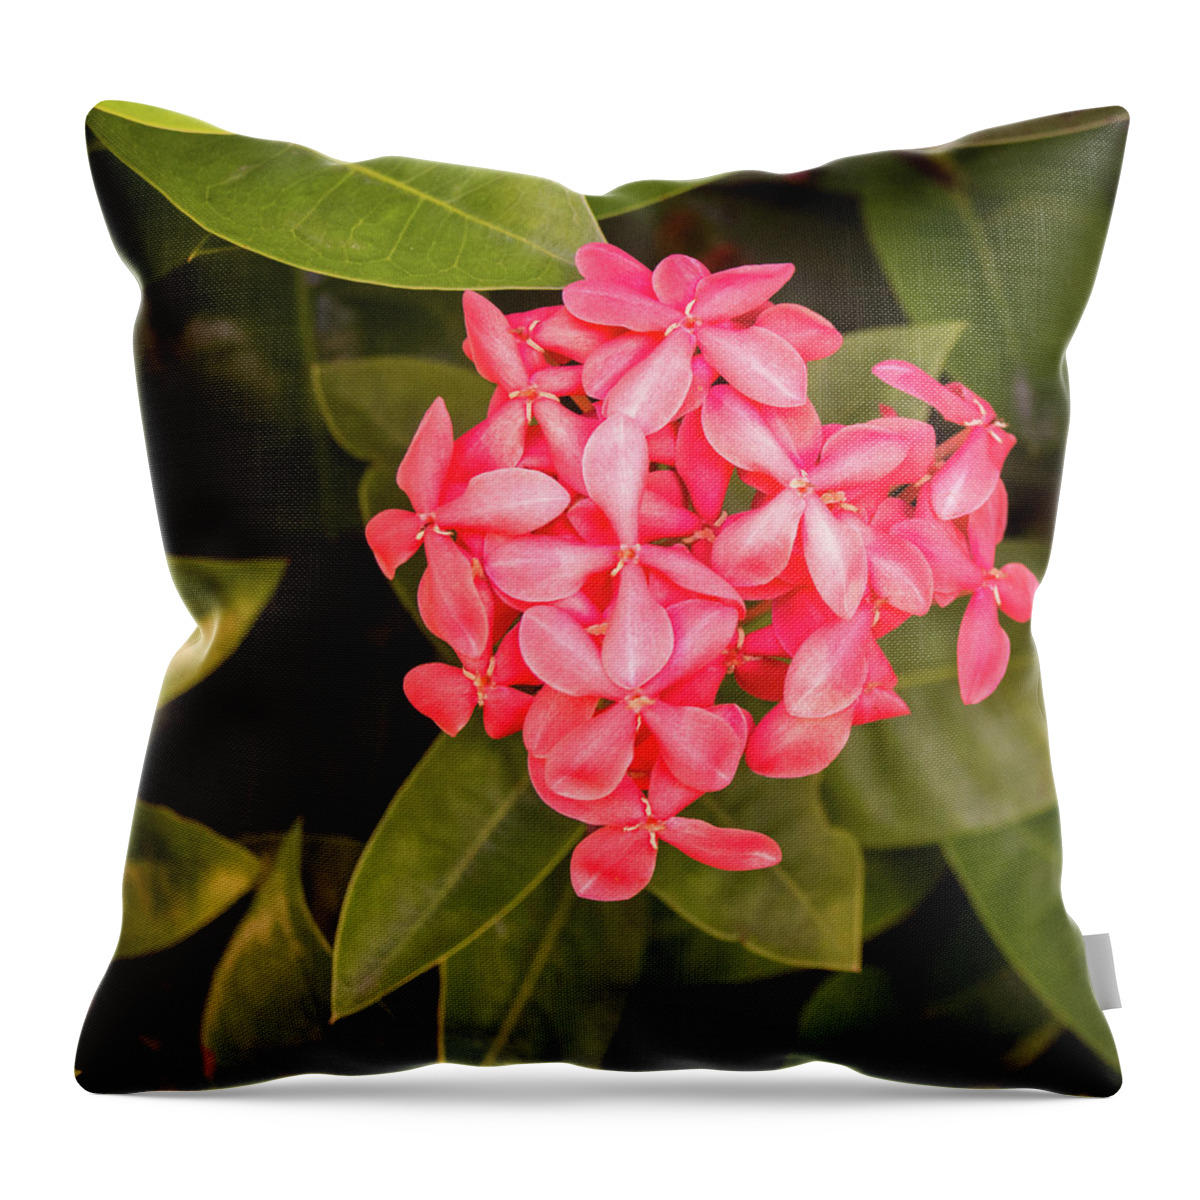  Throw Pillow featuring the photograph Pink Flower #3 by James Gay